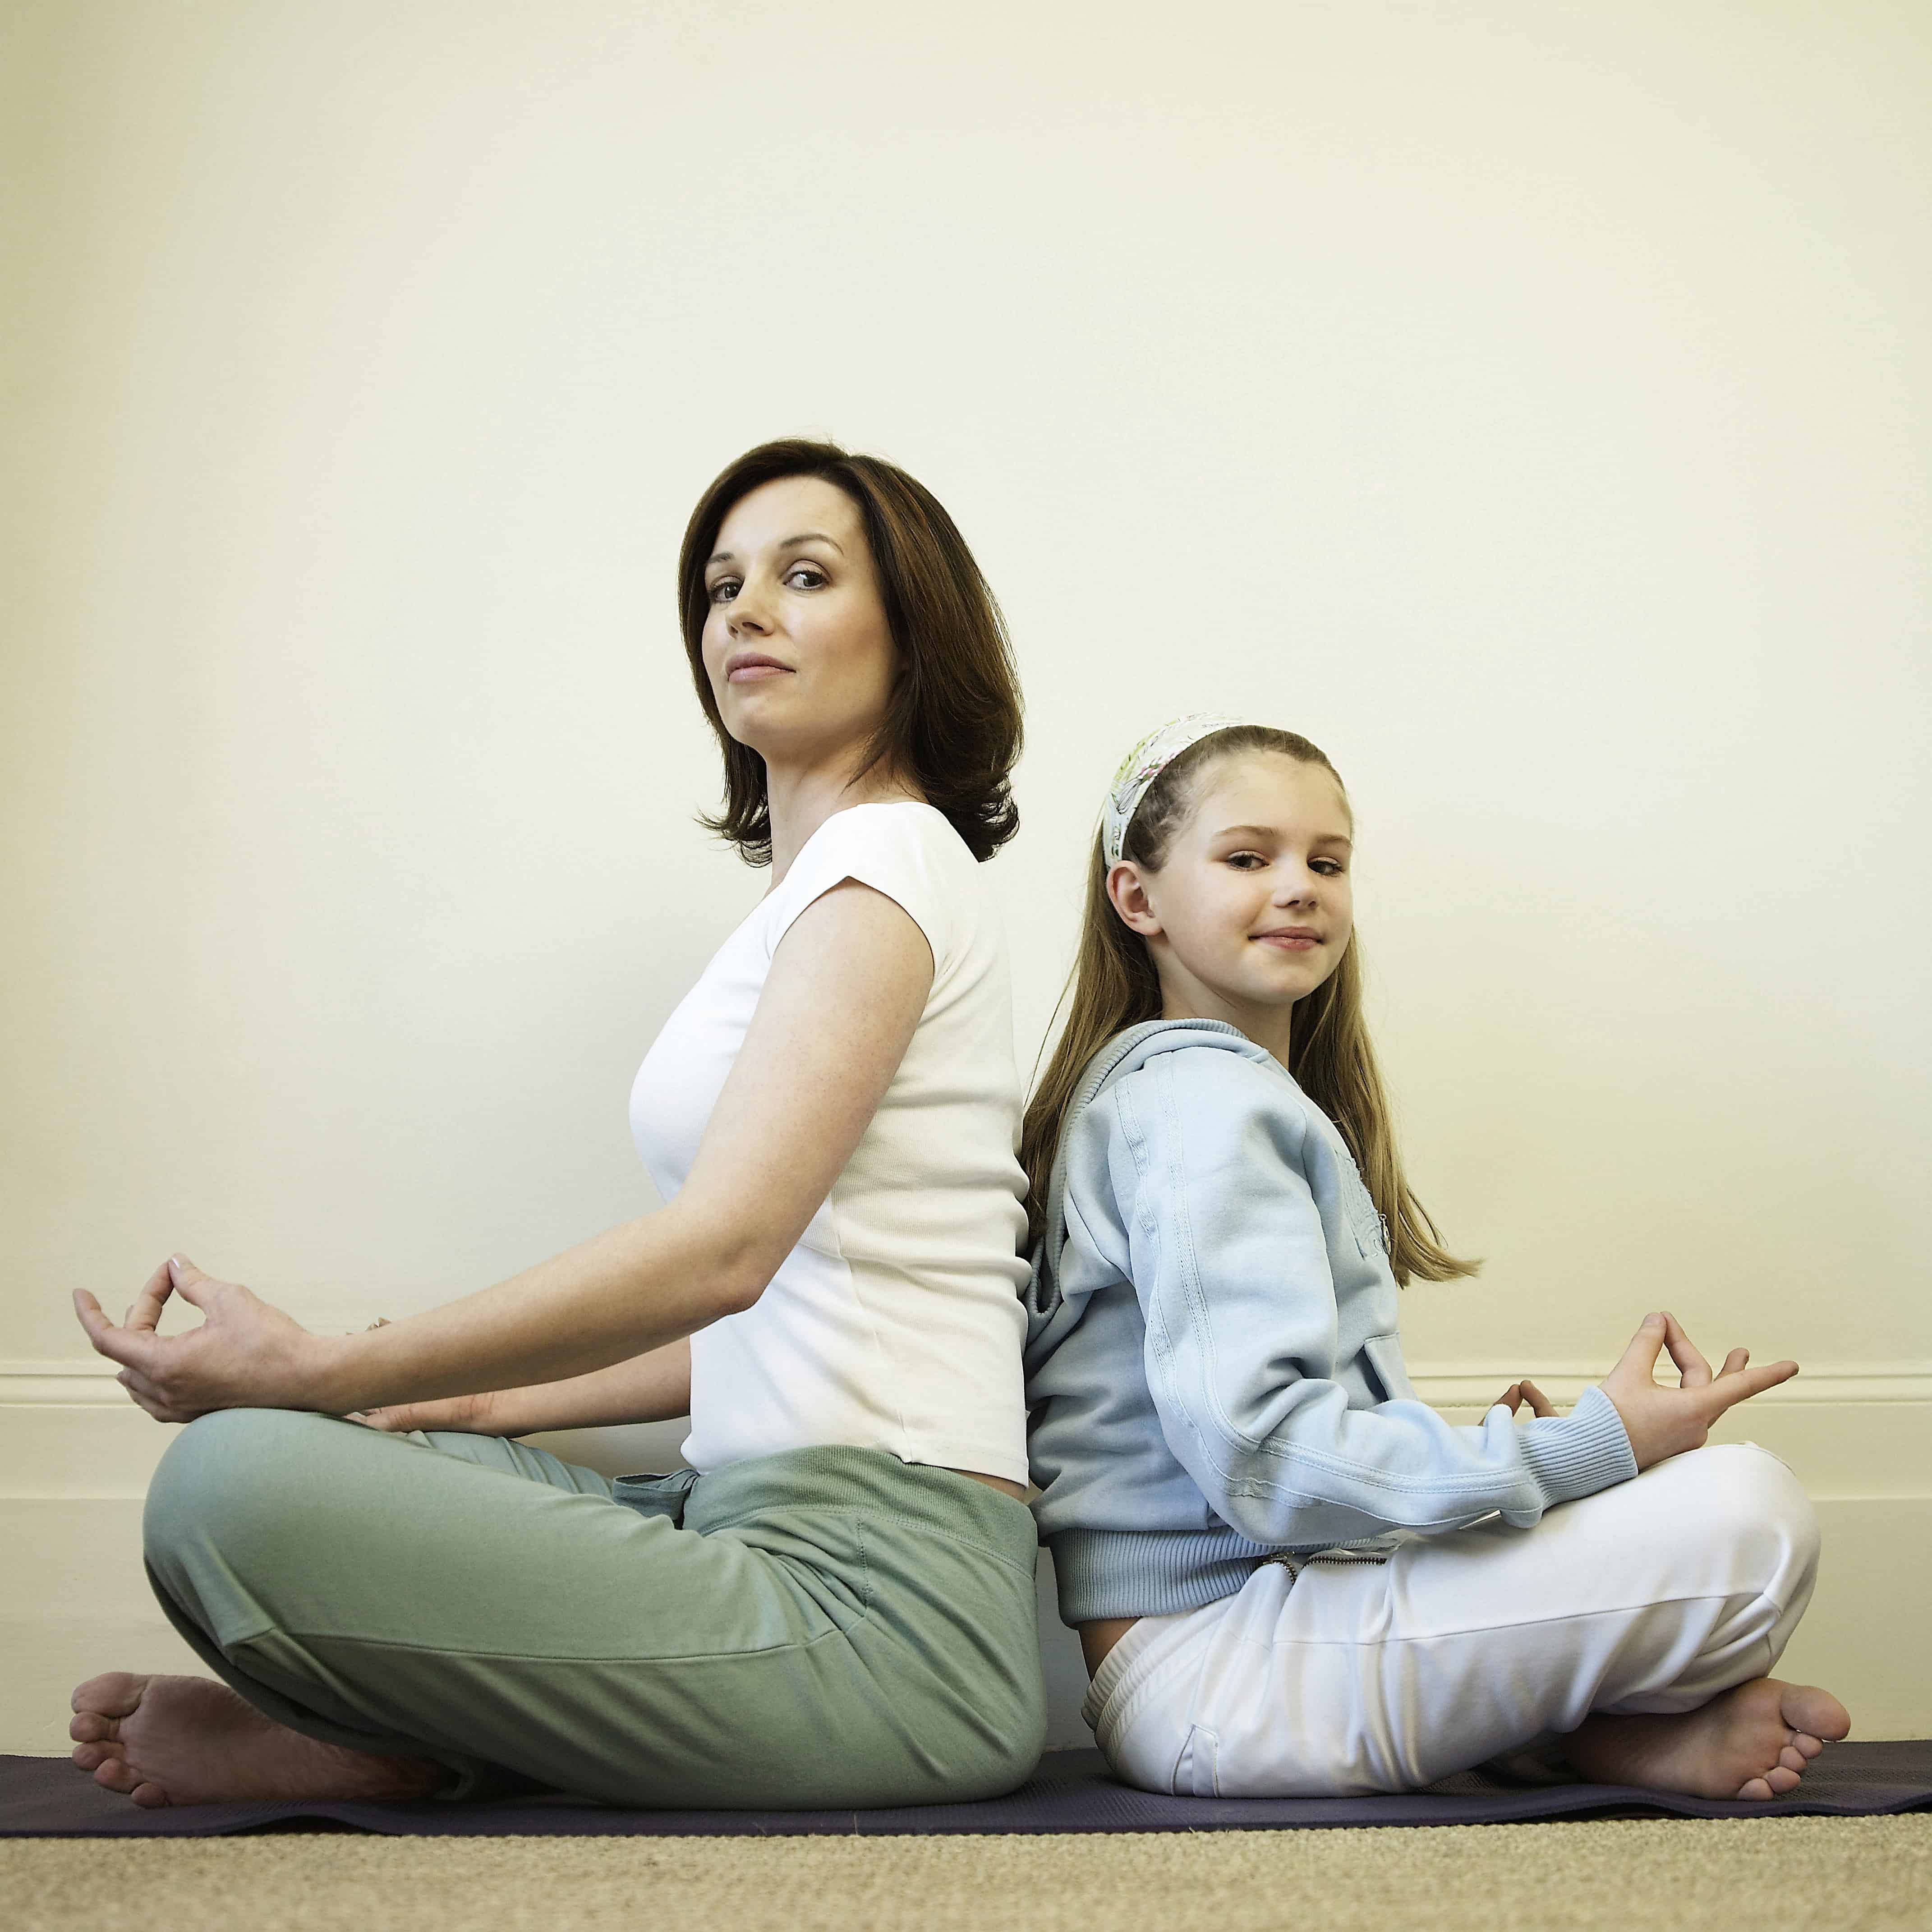 Mother and daughter sitting in lotus pose back-to-back